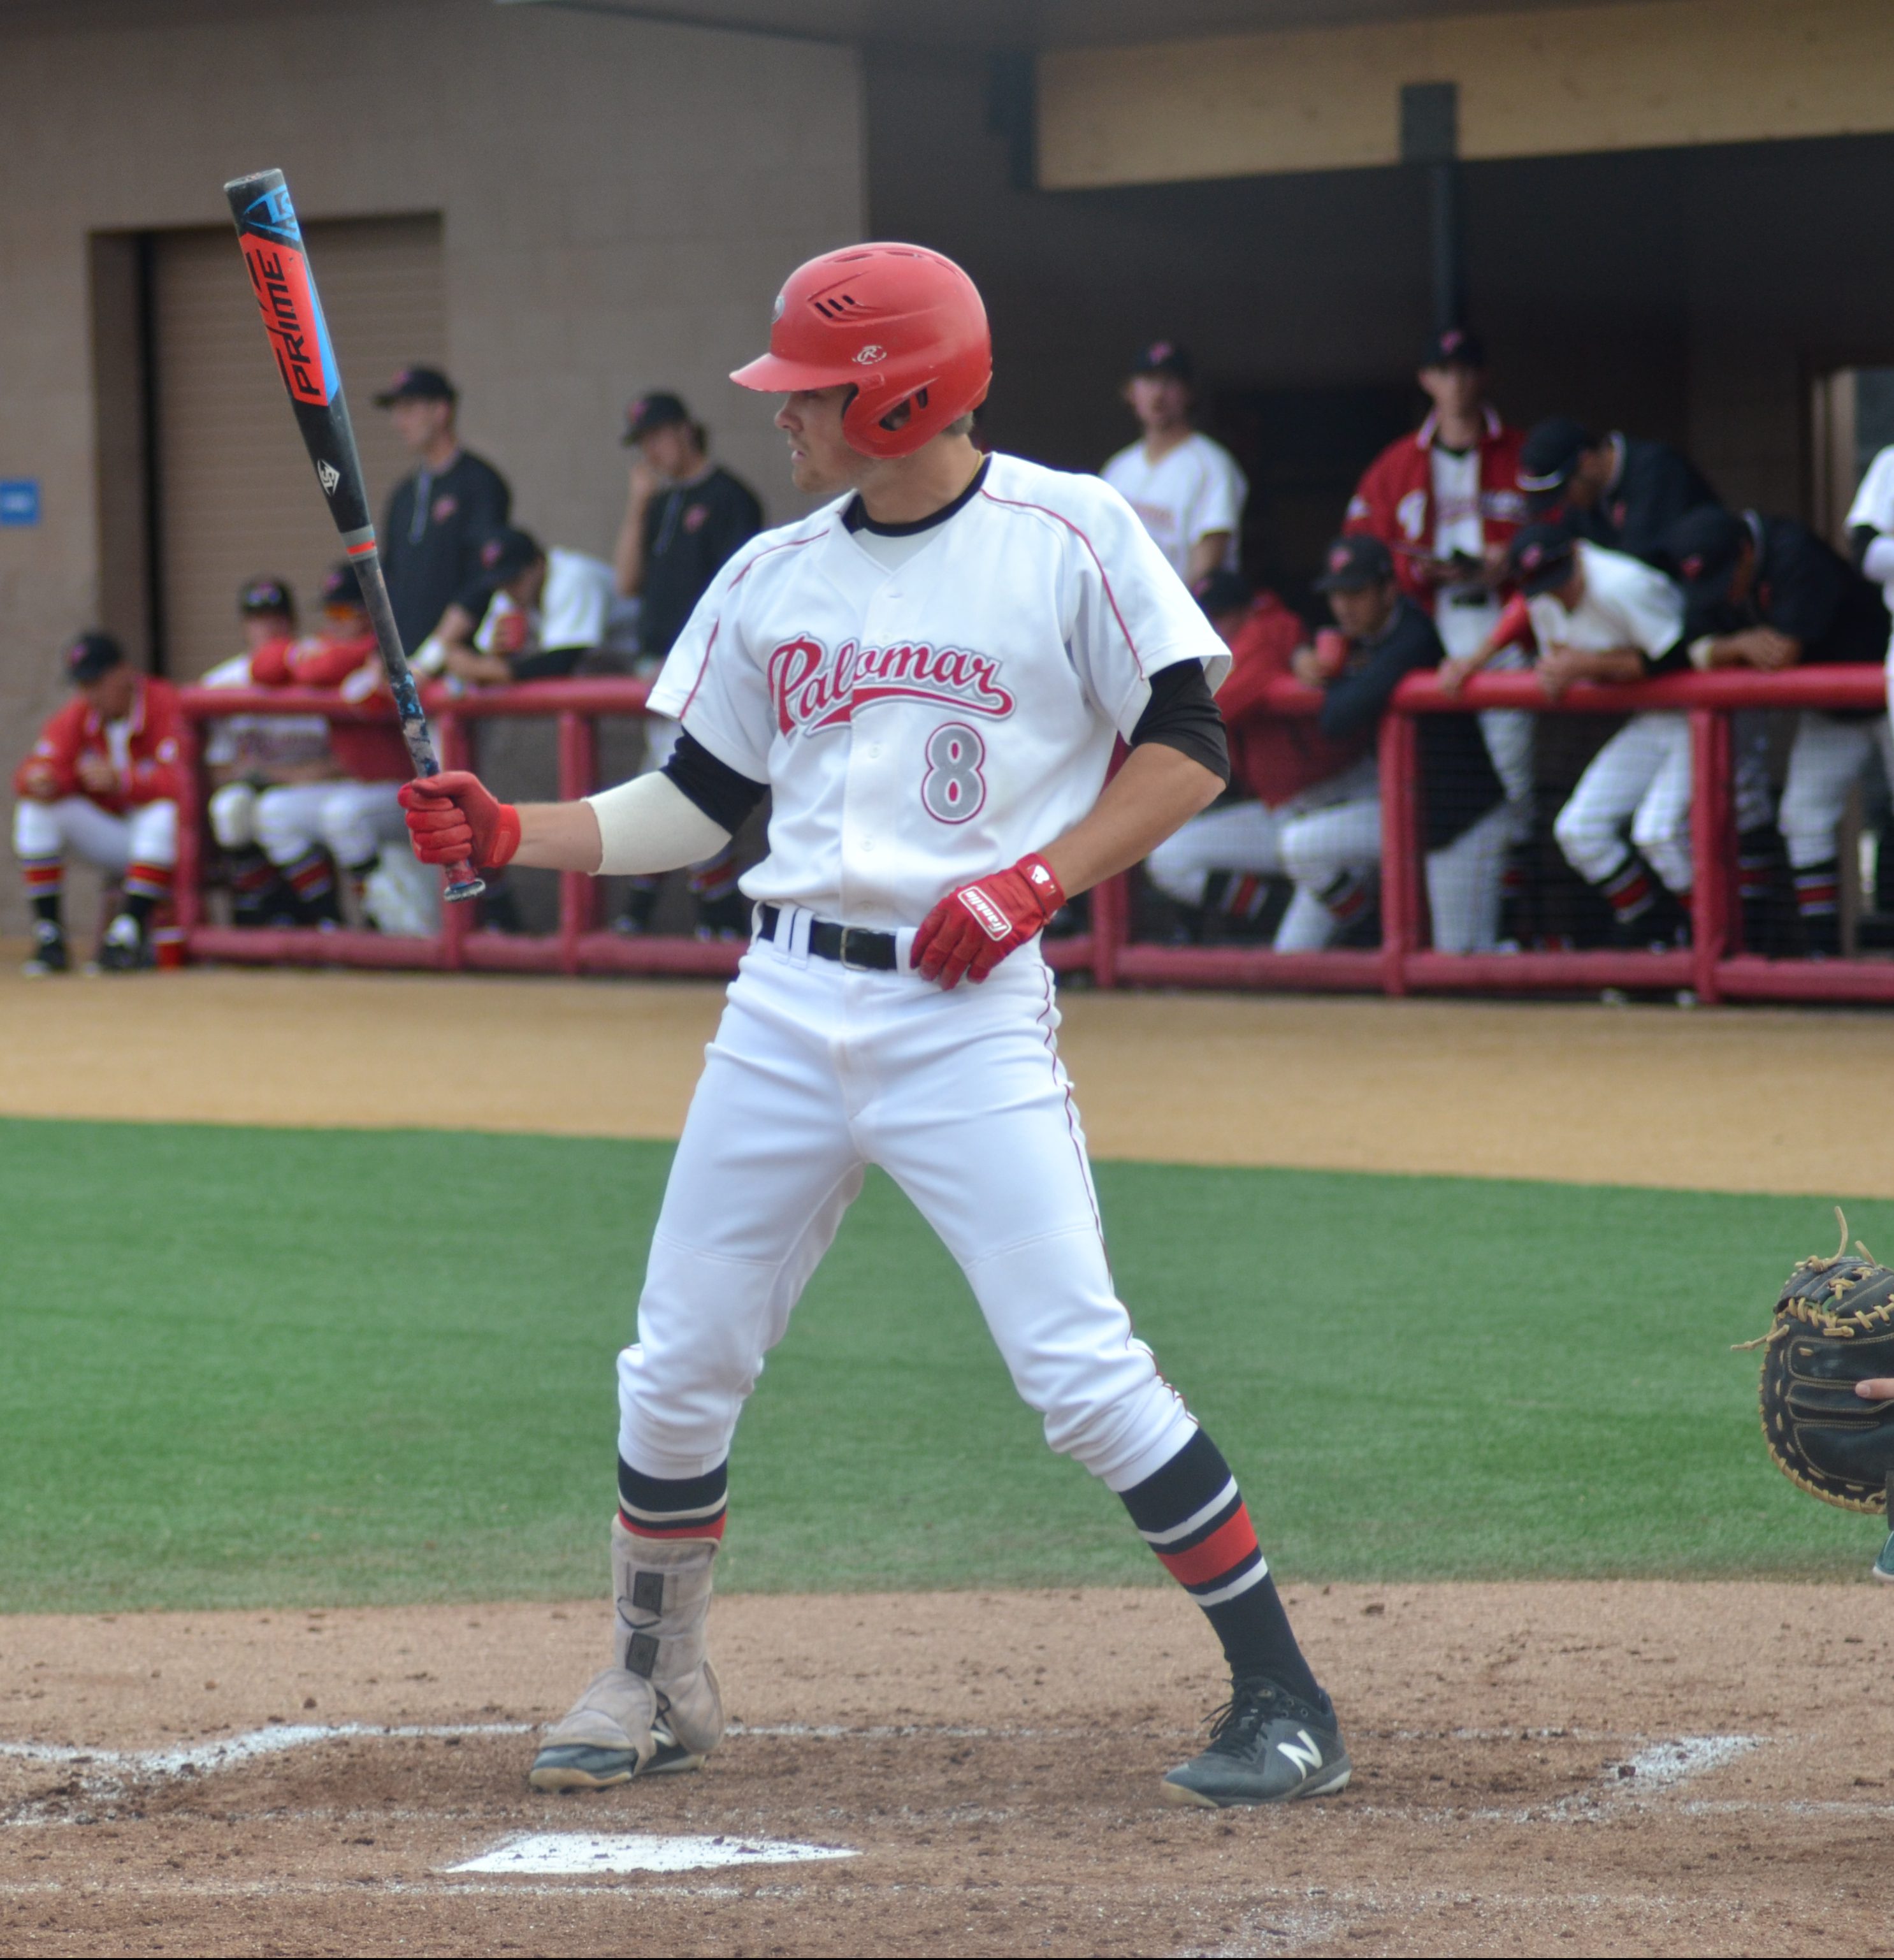 A male Palomar baseball player in a white jersey and pants holds a bat in his right hand as he looks at it. More than a dozen of his teammates watch on from the dugout.